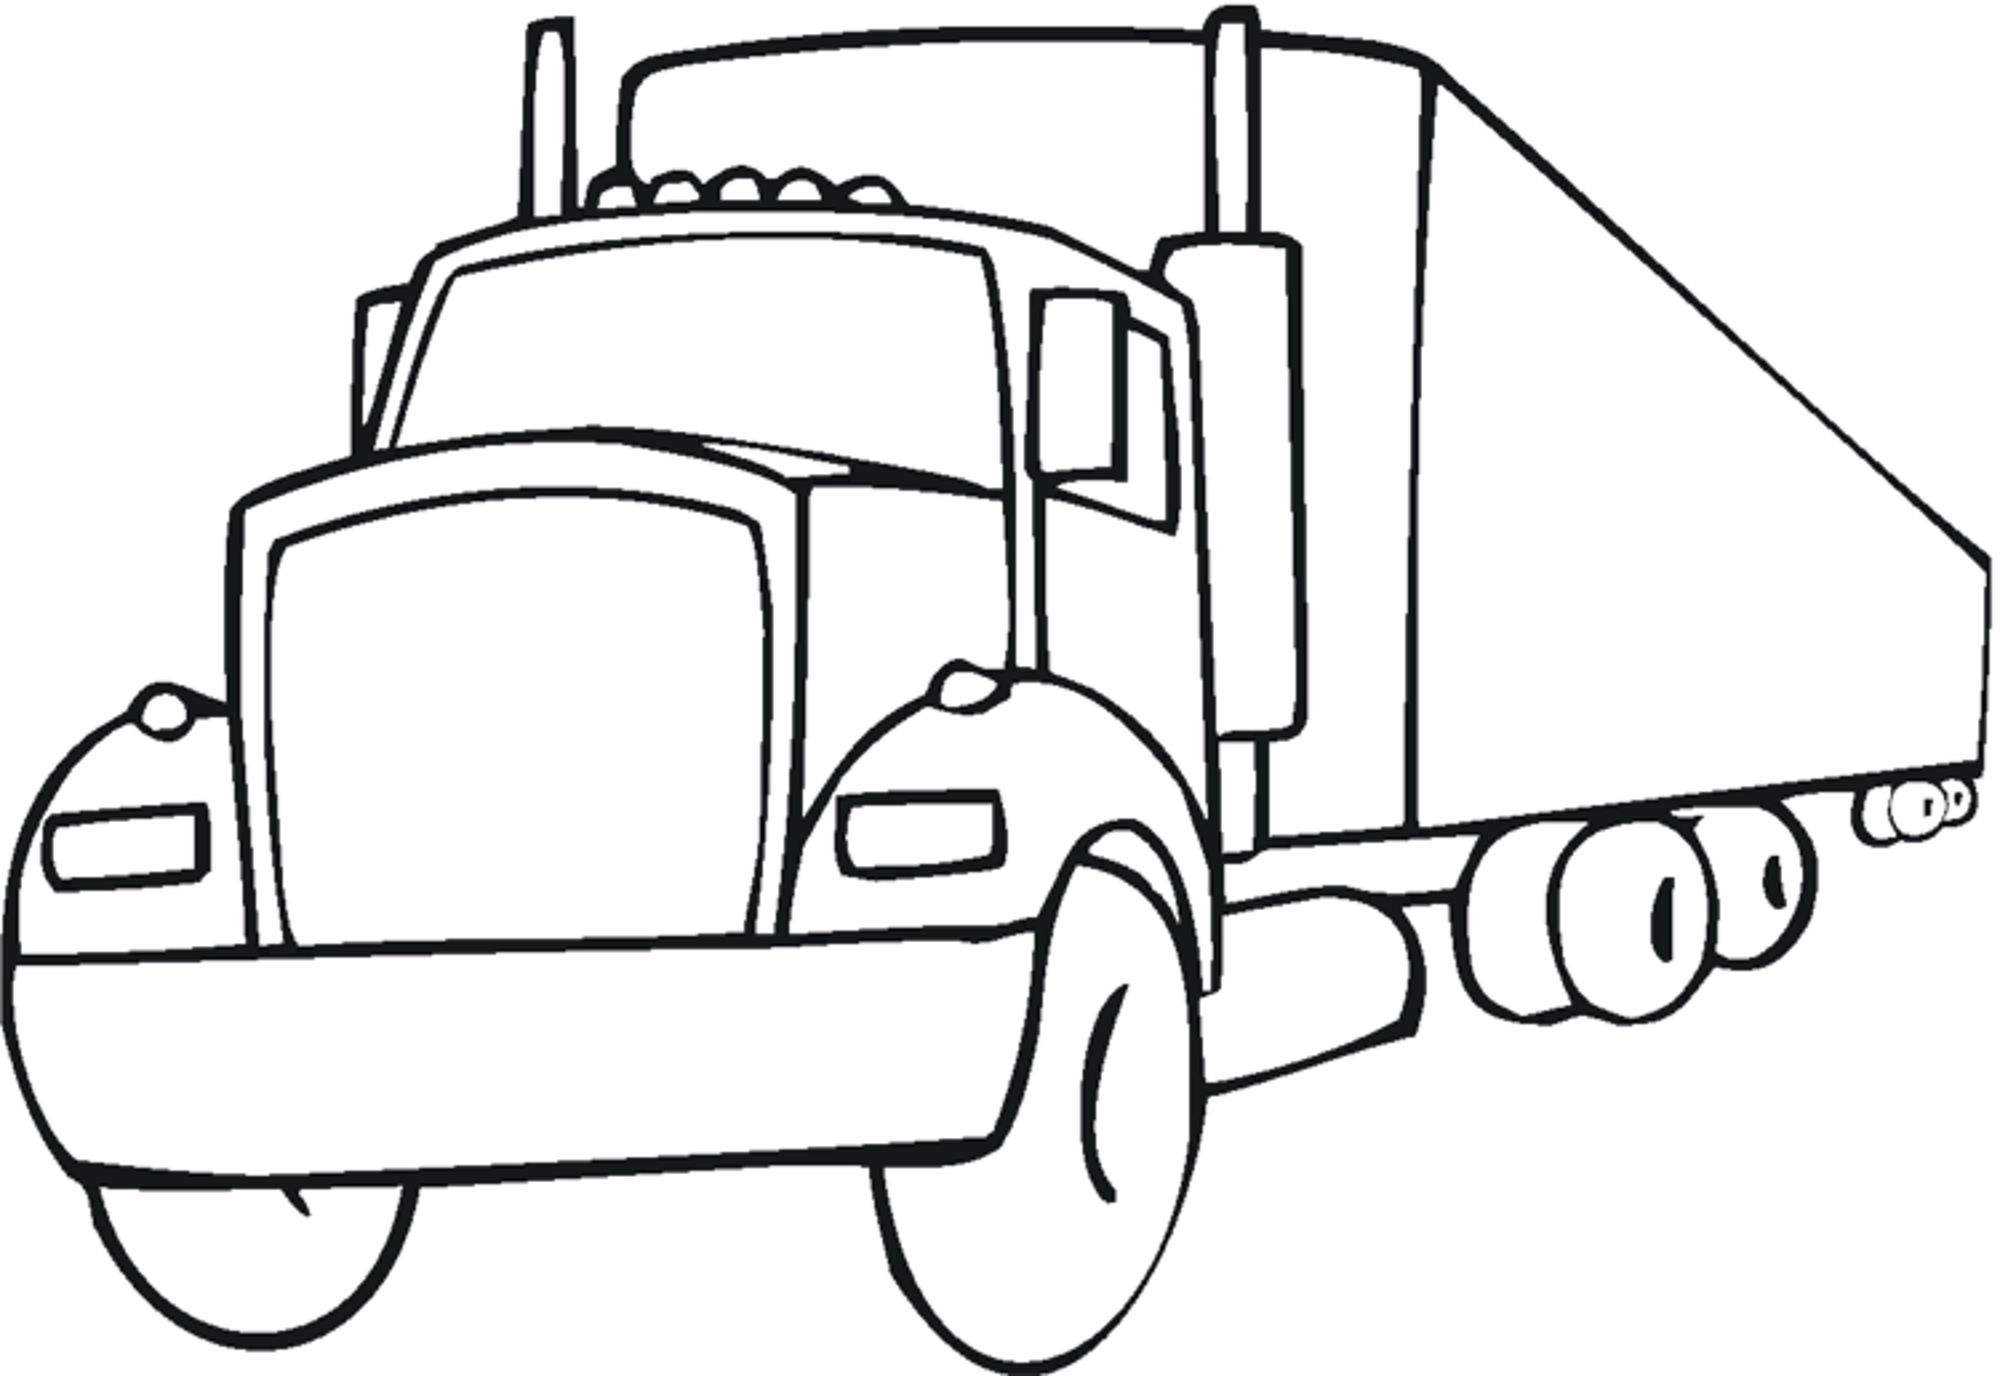 Truck Coloring Pages For Preschoolers Coloring Ideas Simple Truck Coloring Pages For Kids With Free Fire